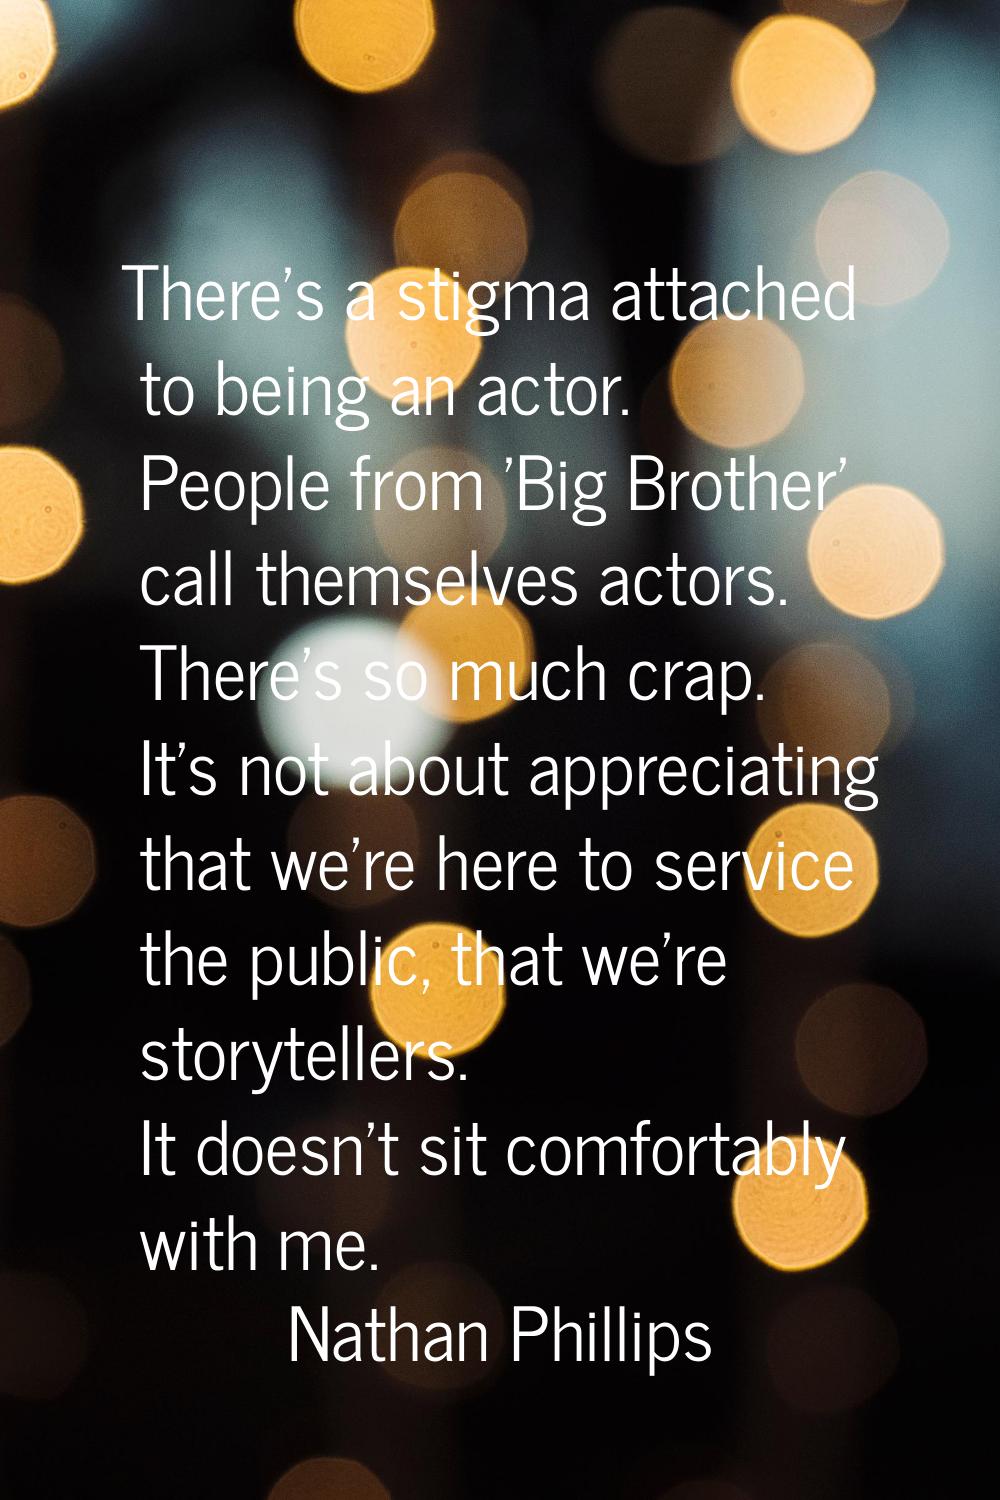 There's a stigma attached to being an actor. People from 'Big Brother' call themselves actors. Ther